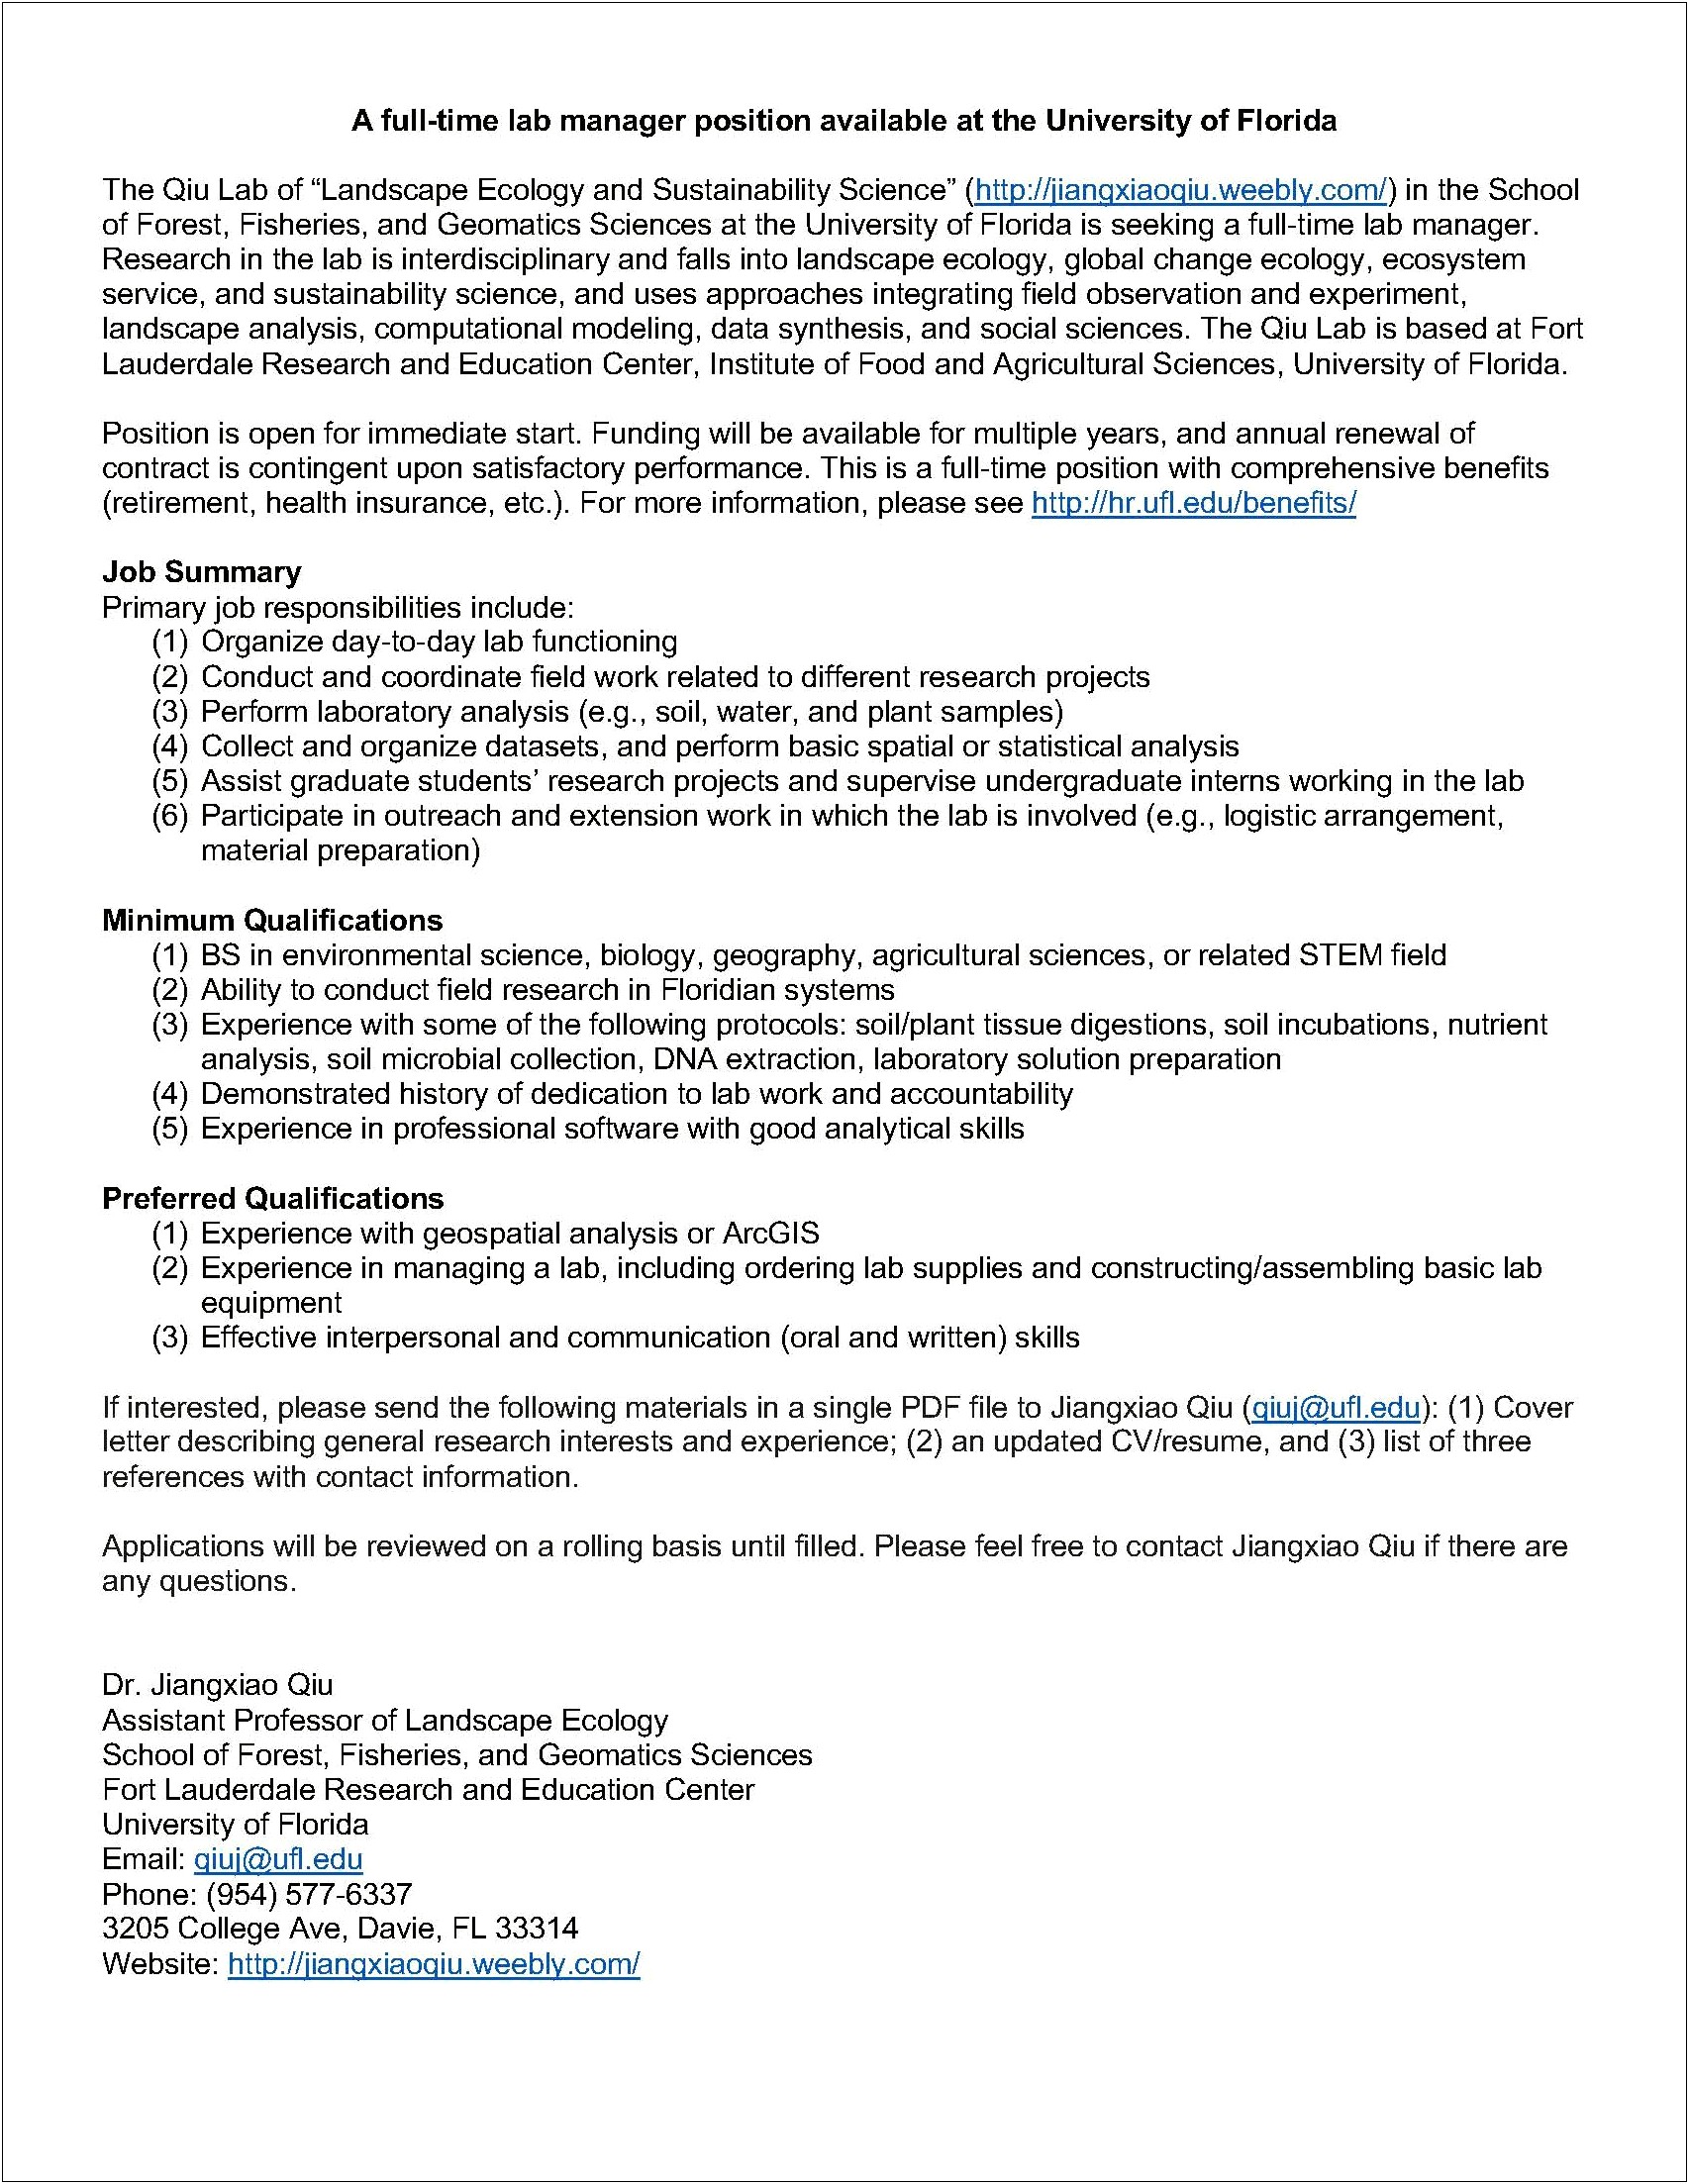 Career Resource Center Uf Cover Letter Template